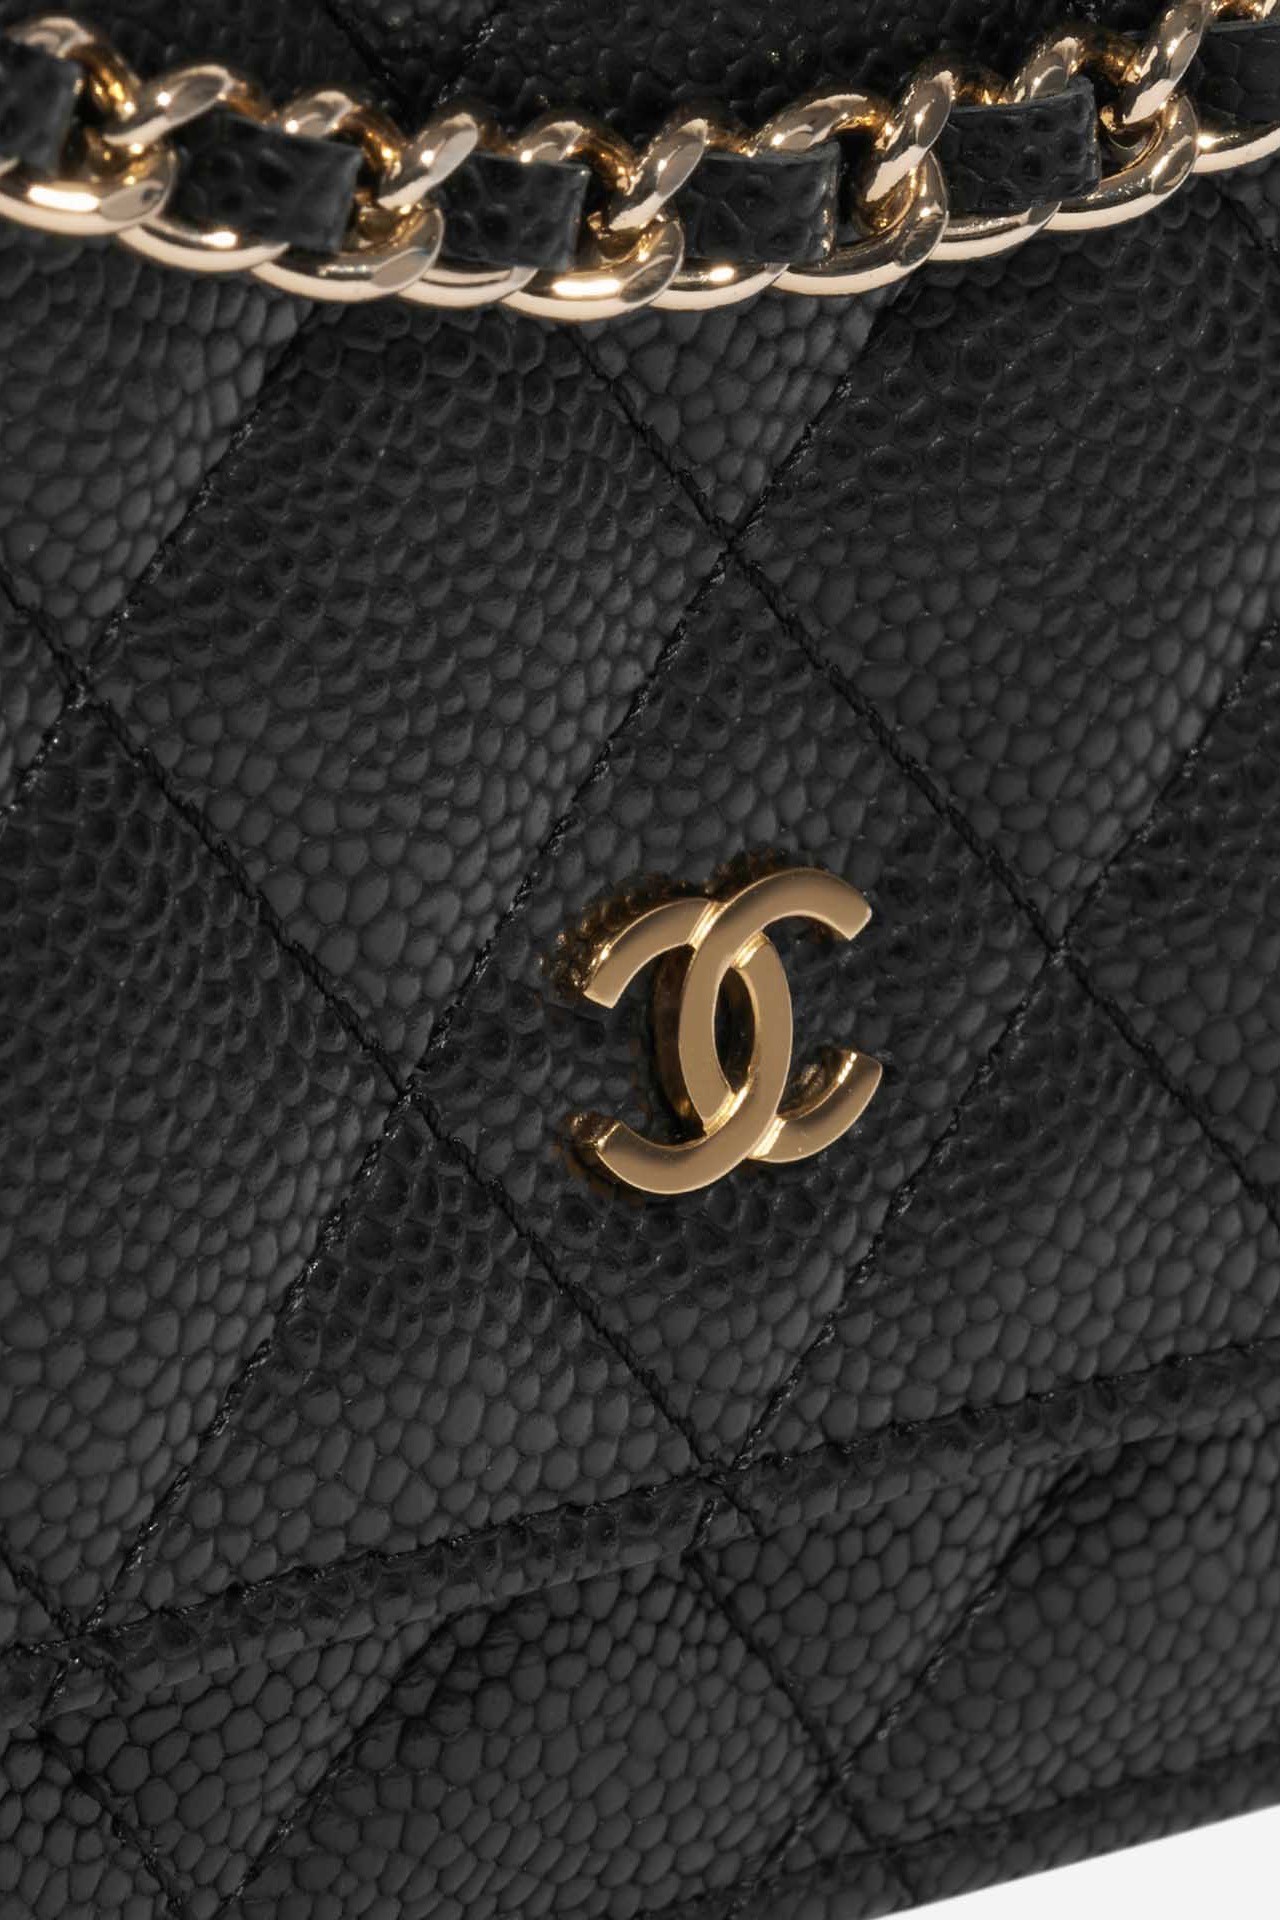 Chanel Black Quilted Caviar Wallet On Chain WOC Gold Hardware